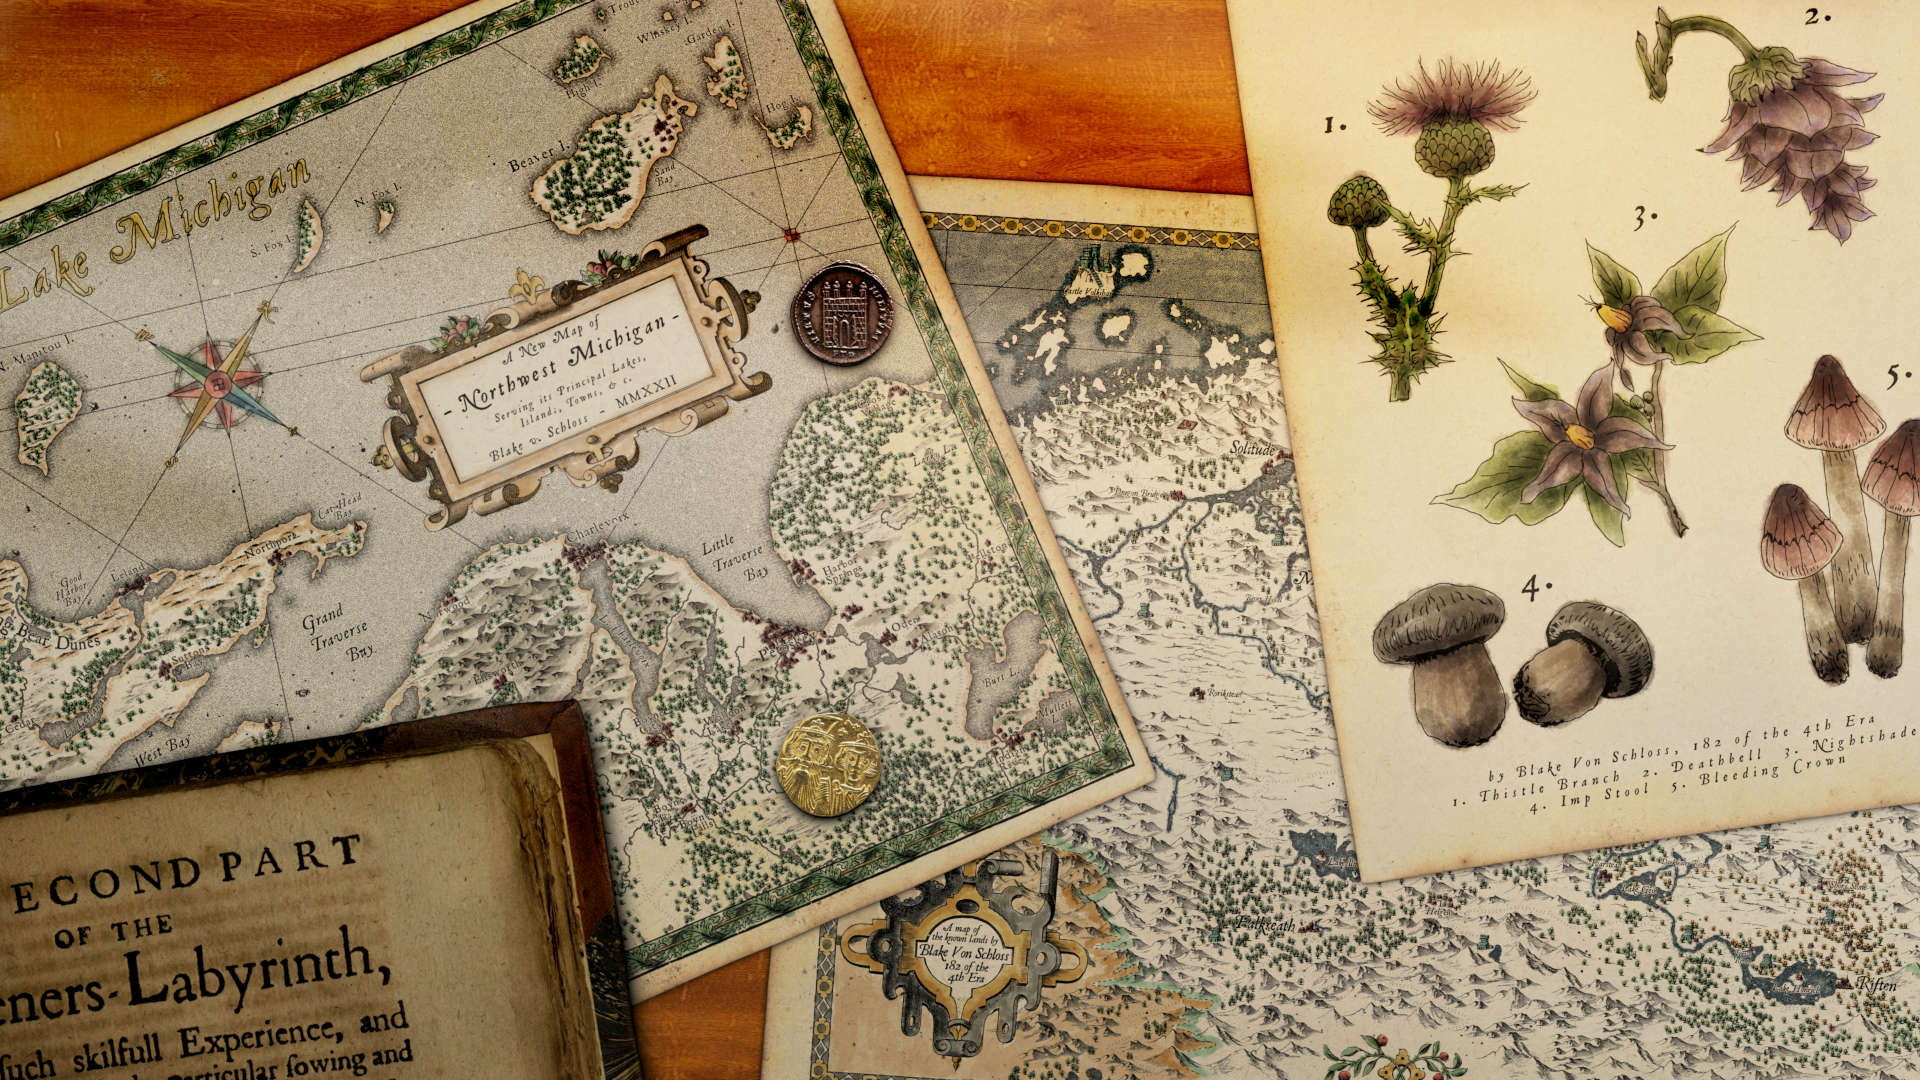 Custom maps and floral art by Blake Von Schloss in a historical 16th century European style.